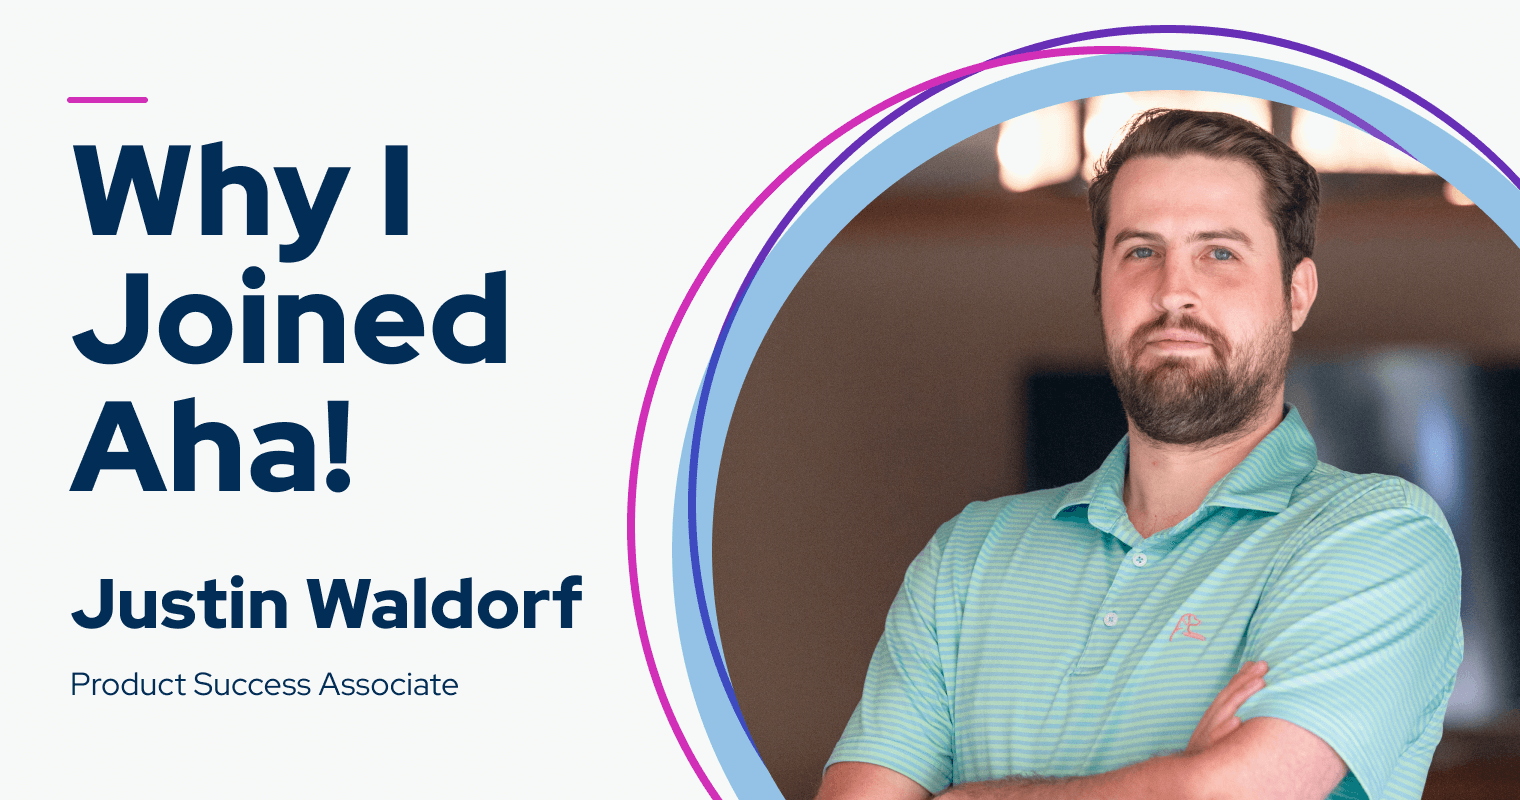 My name is Justin Waldorf — this is why I joined Aha!